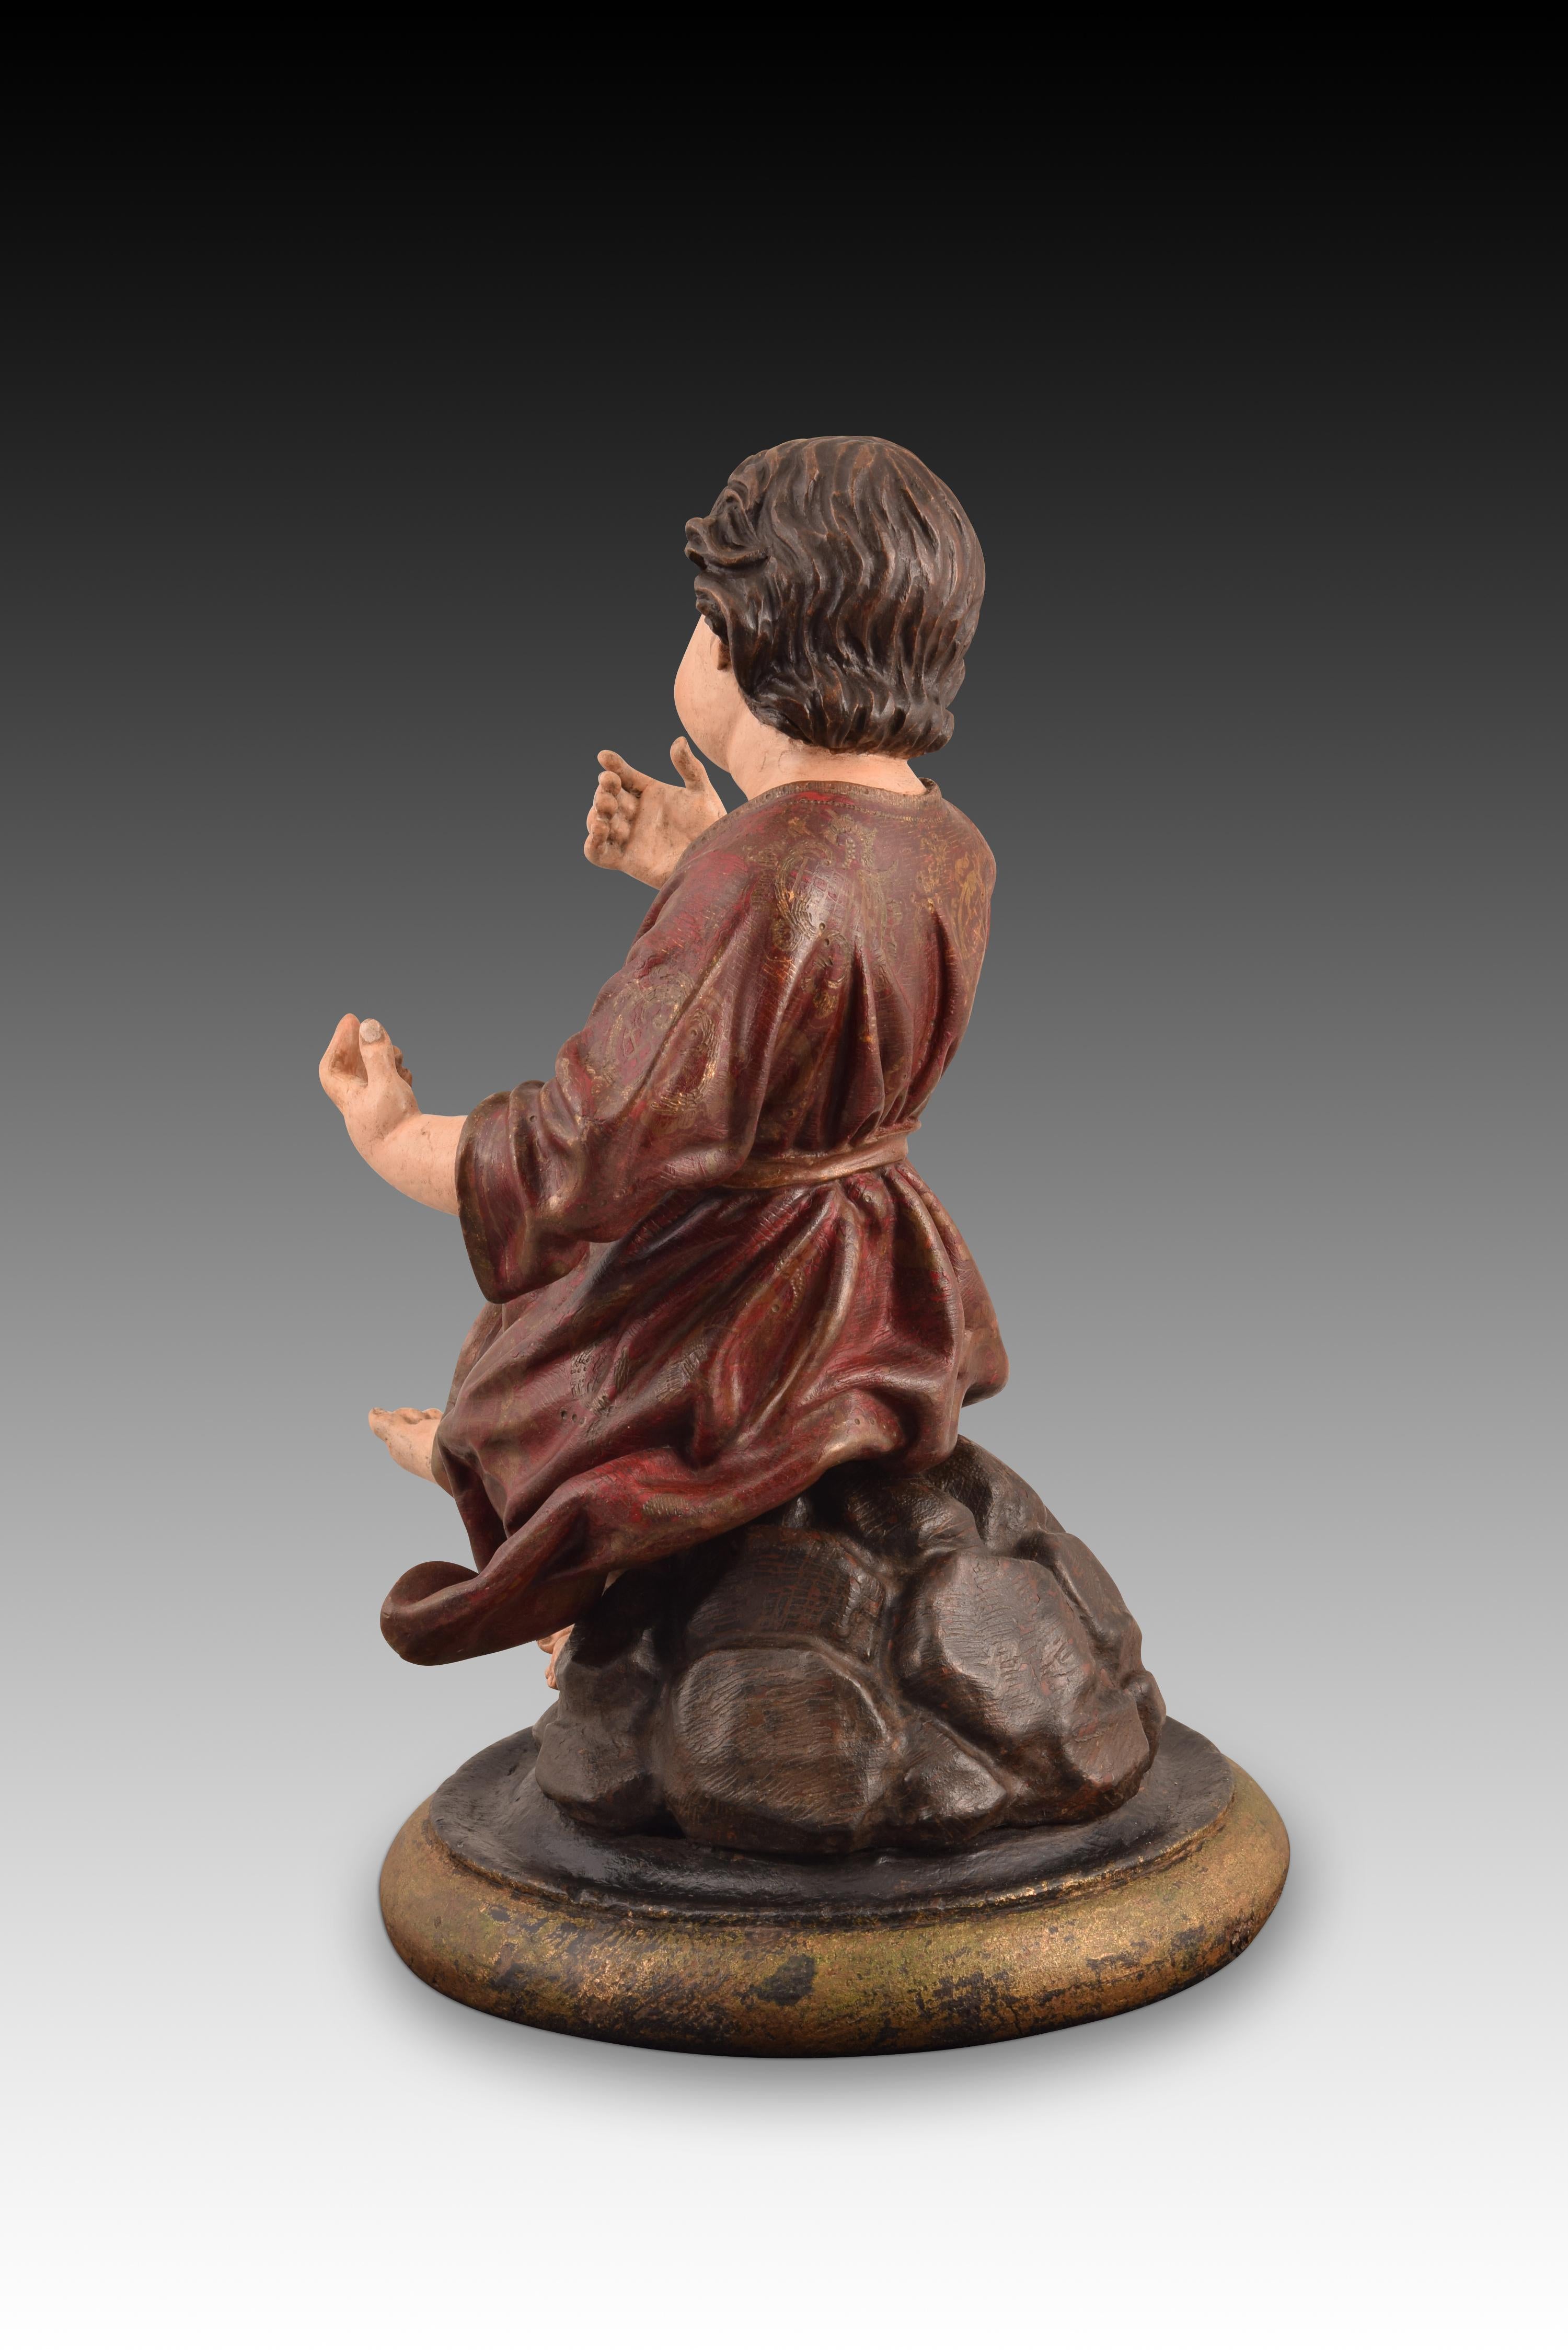 Rococo Child Jesus of the Passion. Wood. Andalusian School, Spain, 18th century.